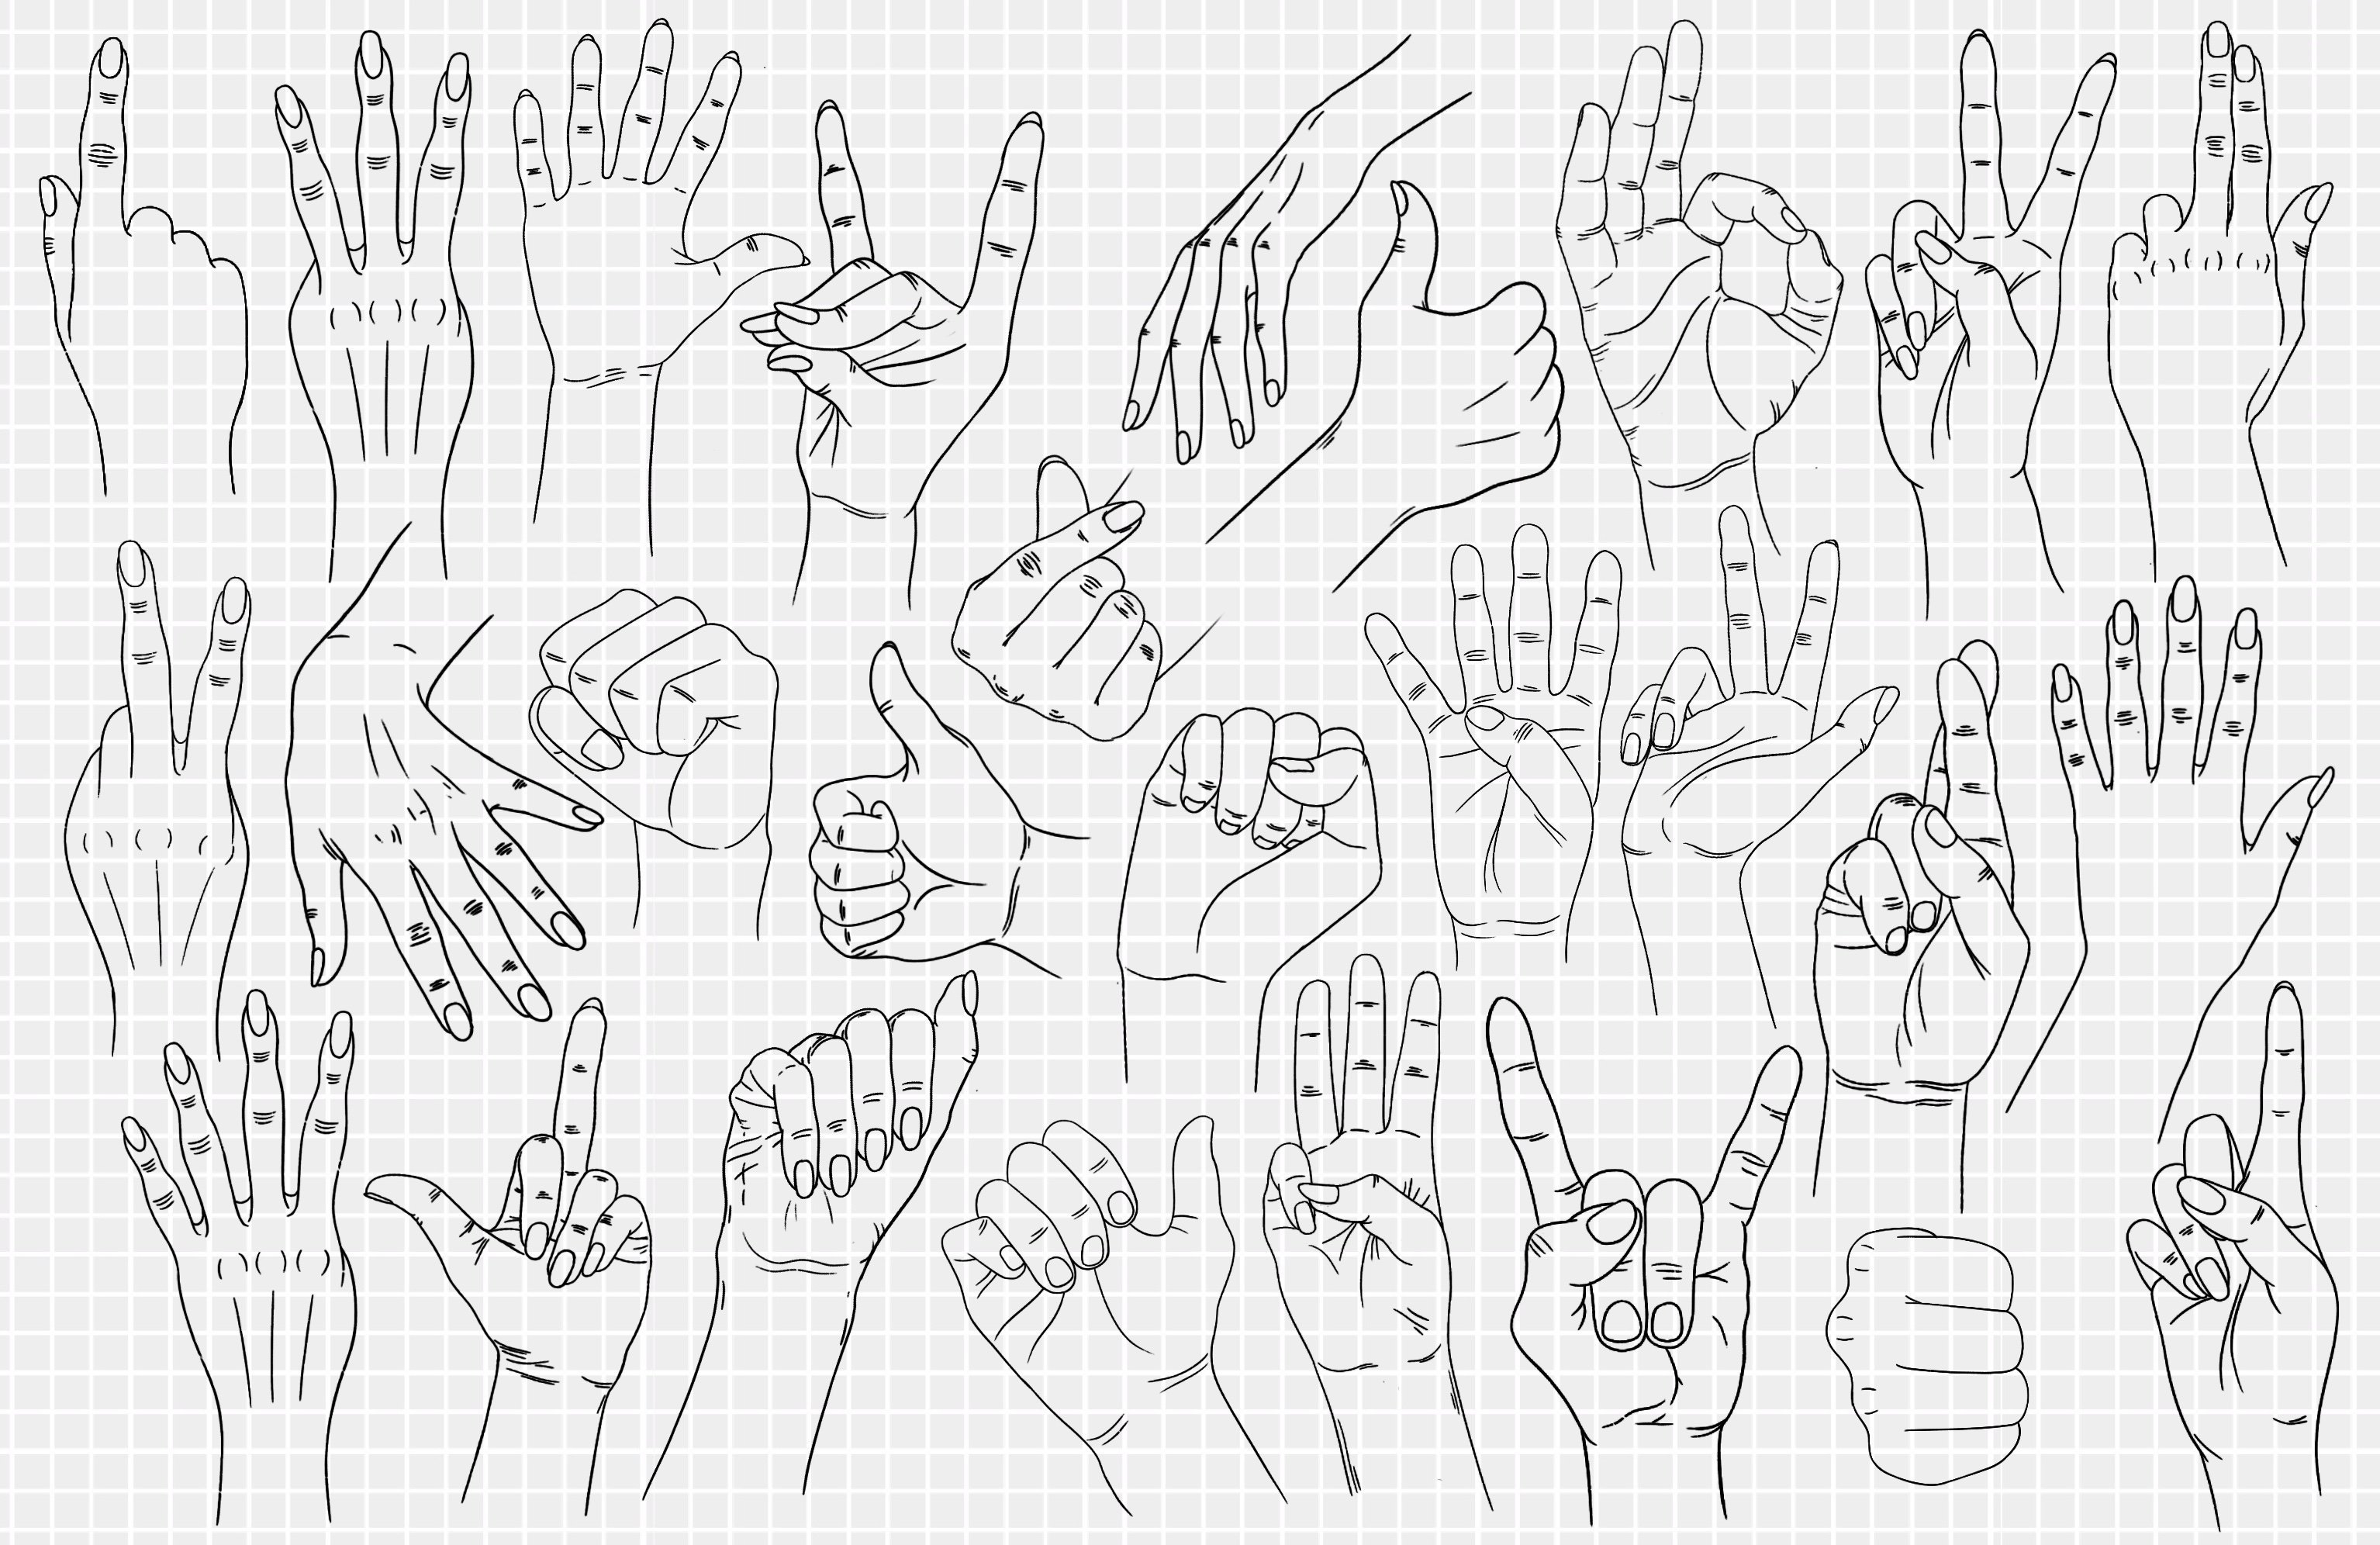 Photoshop Hands Stamps Brushespreview image.